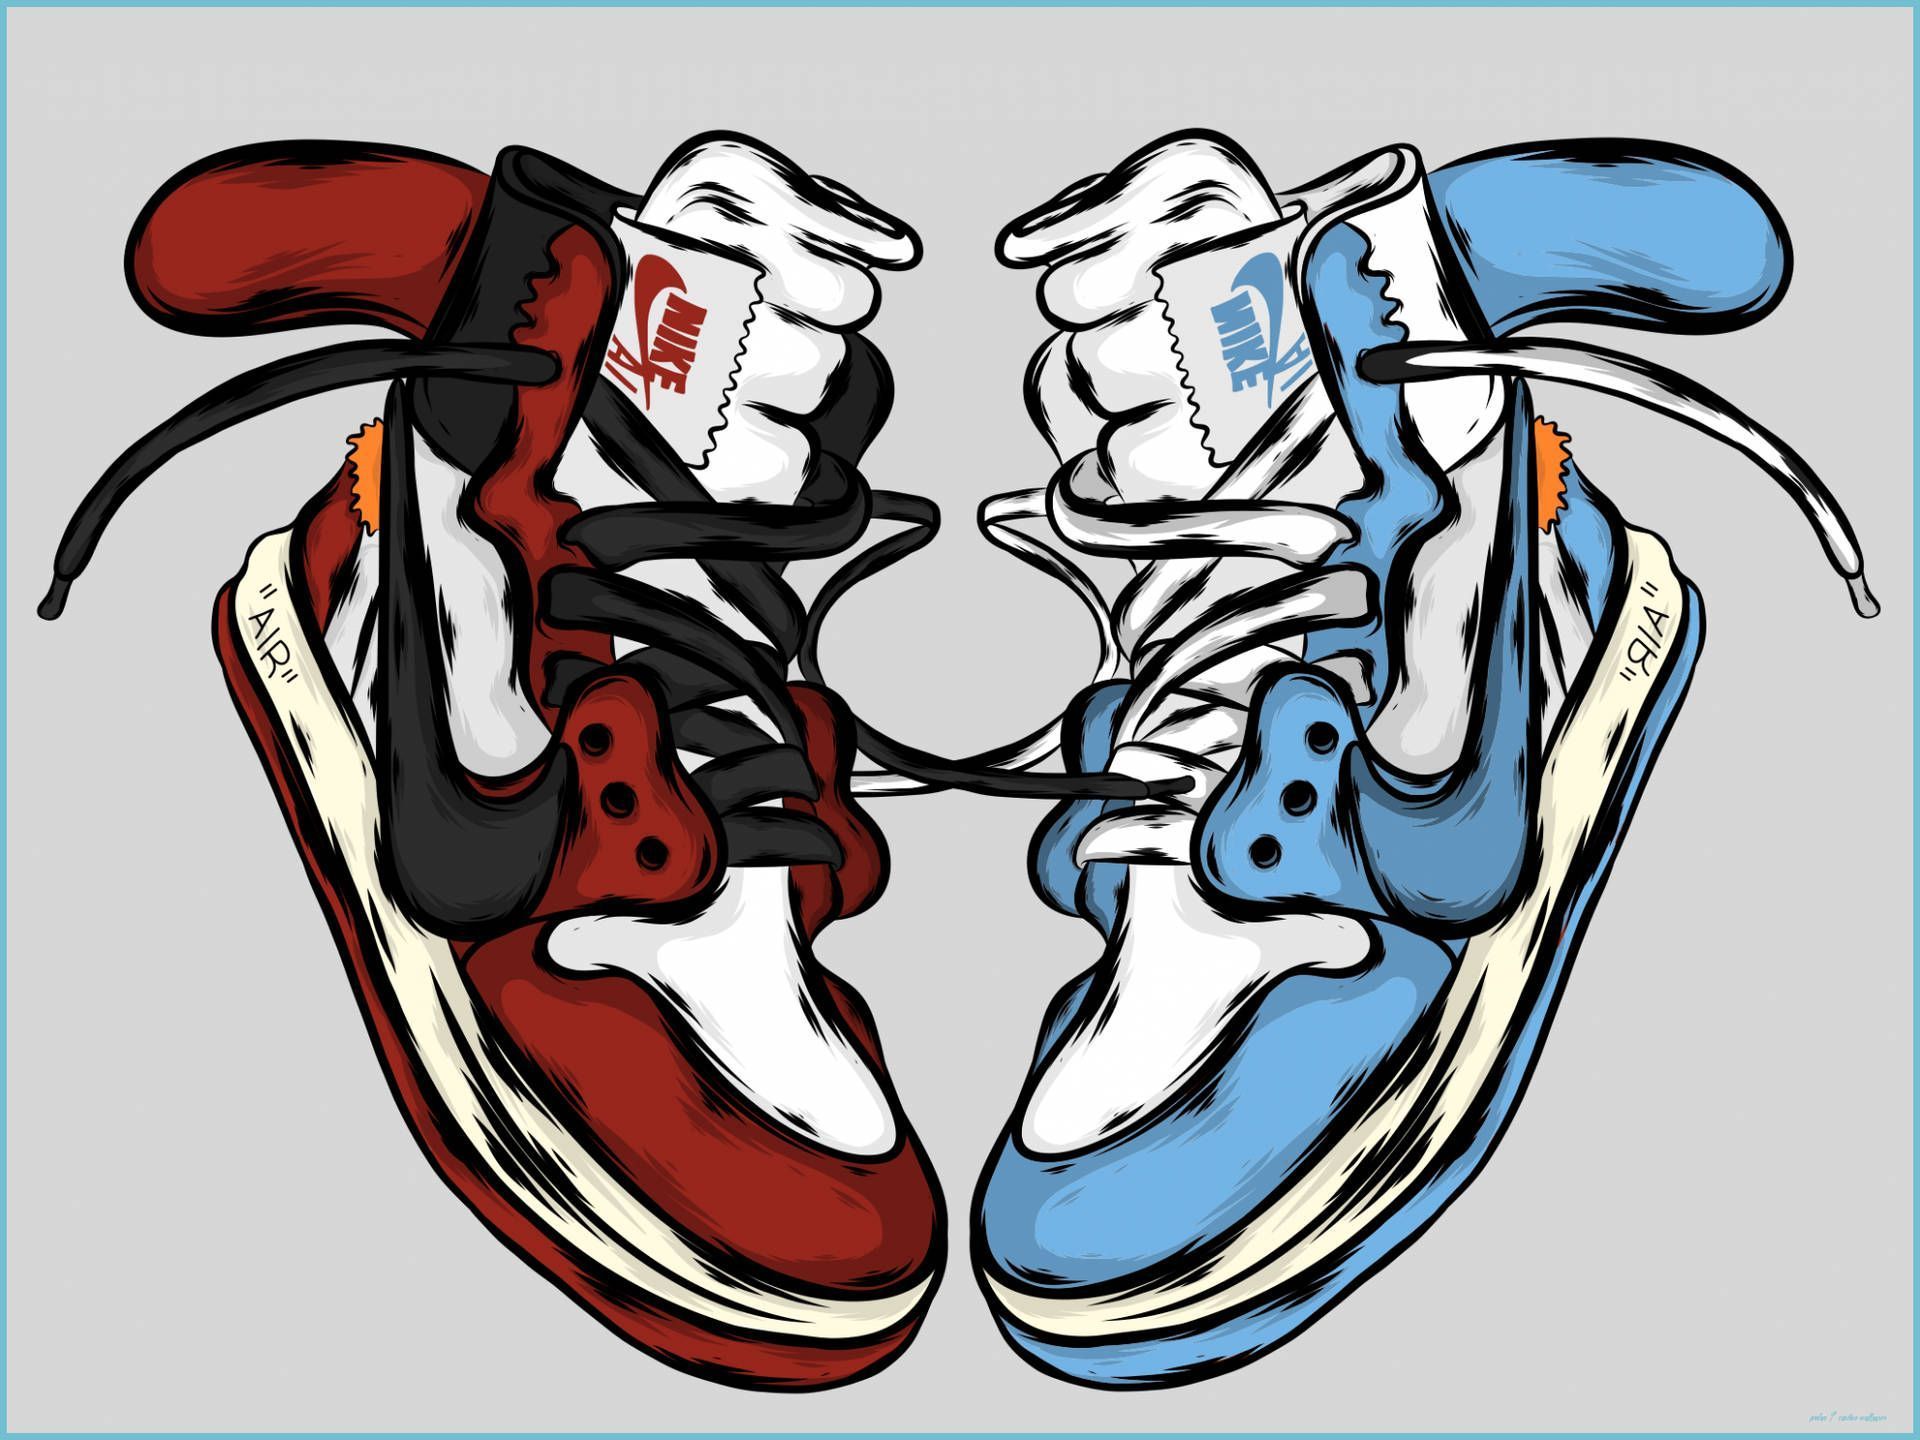 A pair of sneakers, one red and white and one blue and white, are shown in a cartoon style. - Air Jordan 1